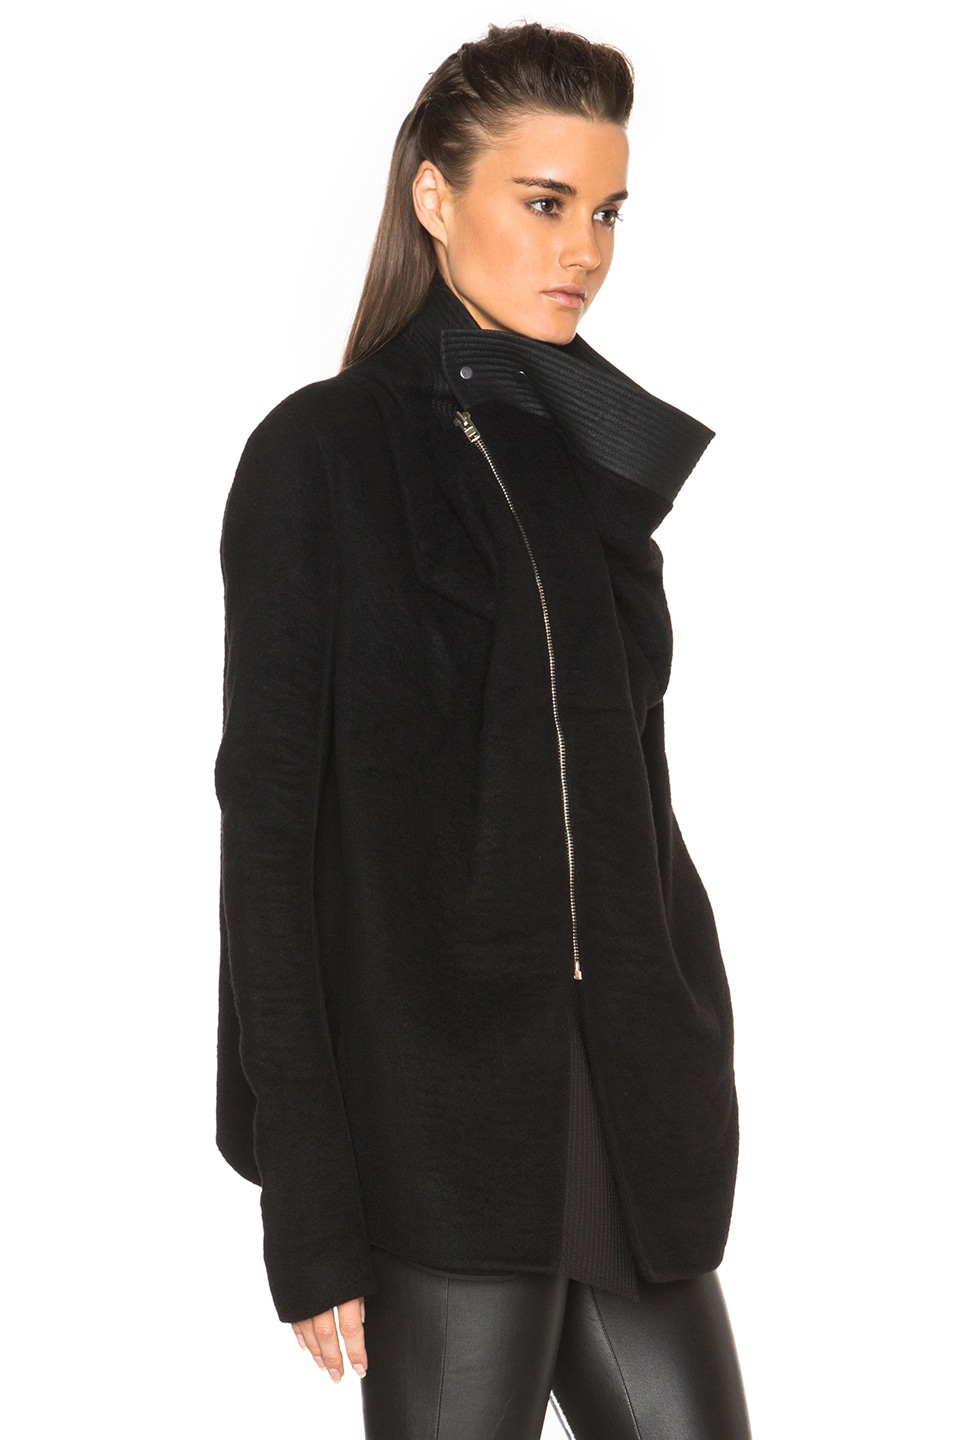 Rick Owens Exploder Saturn Cashmere and Lamb Jacket in Black | FWRD